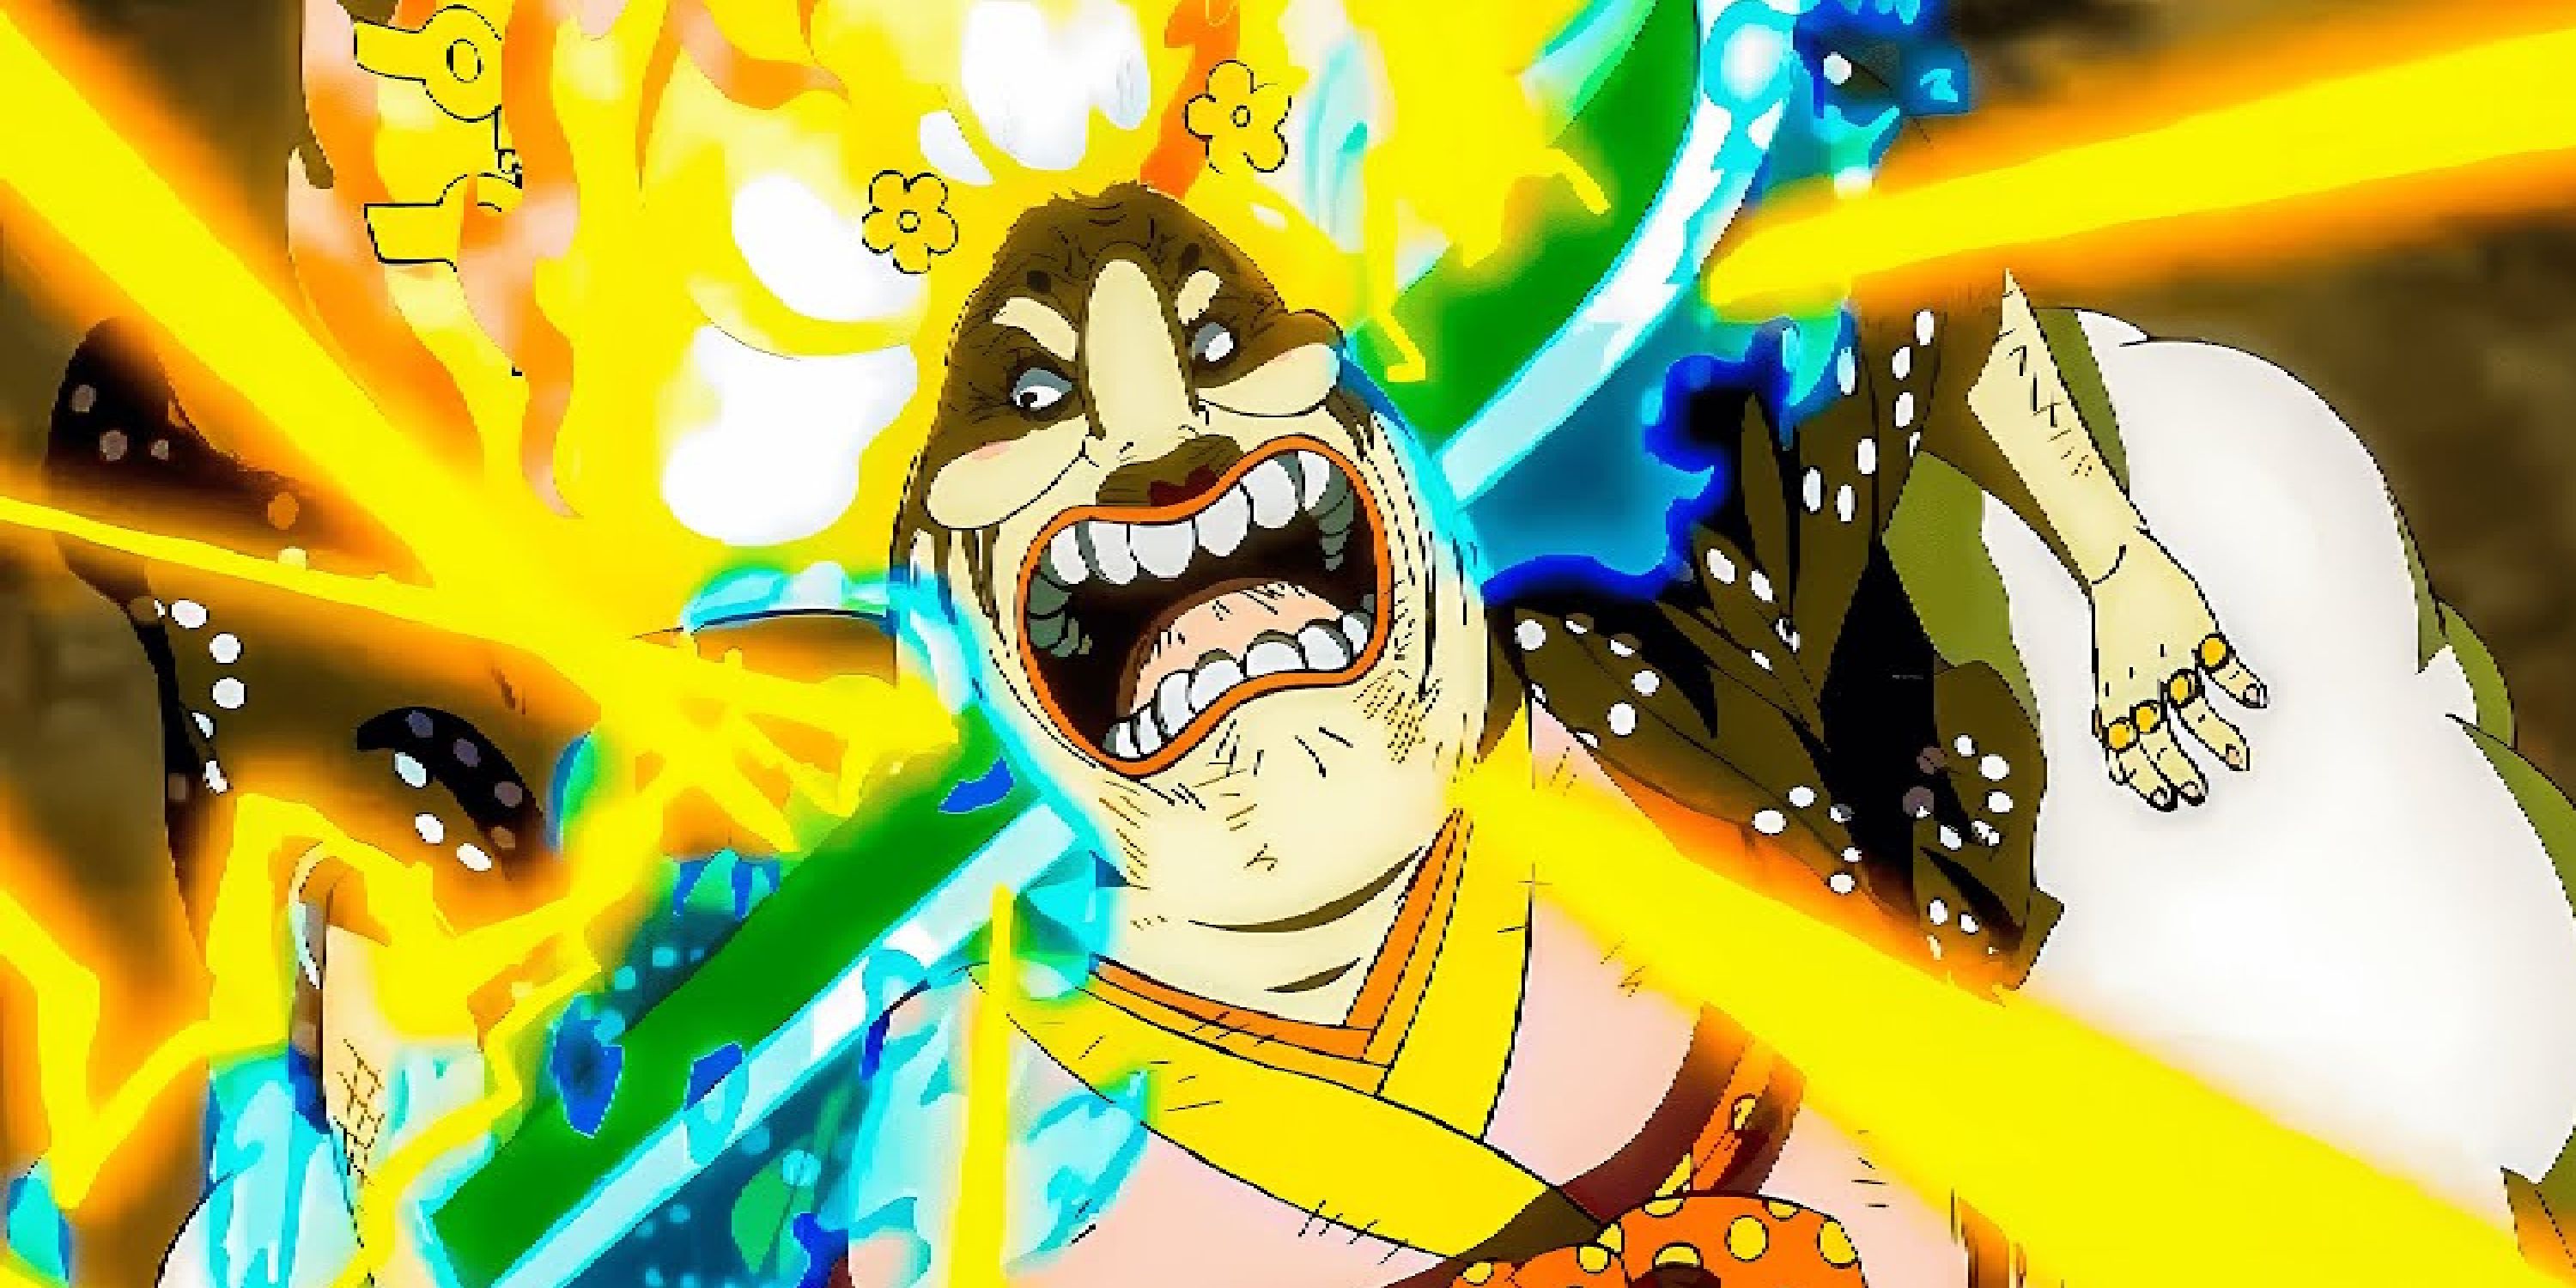 Law uses Shock Wille to defeat Big Mom during One Piece's Onigashima Raid.